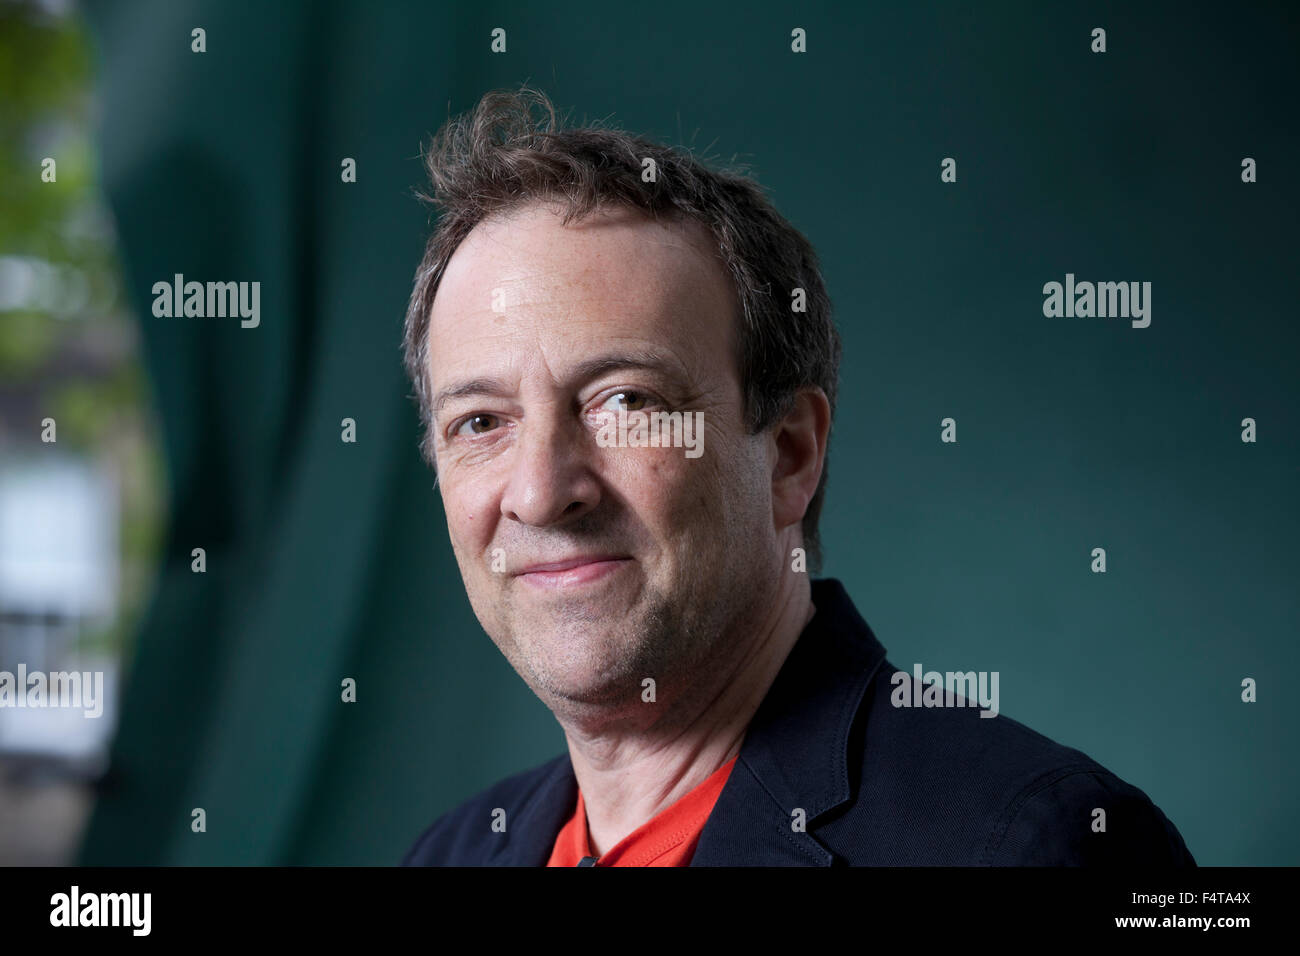 Misha Glenny is a British journalist, reporting on organised crime and cybersecurity, at the Edinburgh International Book Festival 2015. Edinburgh. 31st August 2015 Stock Photo